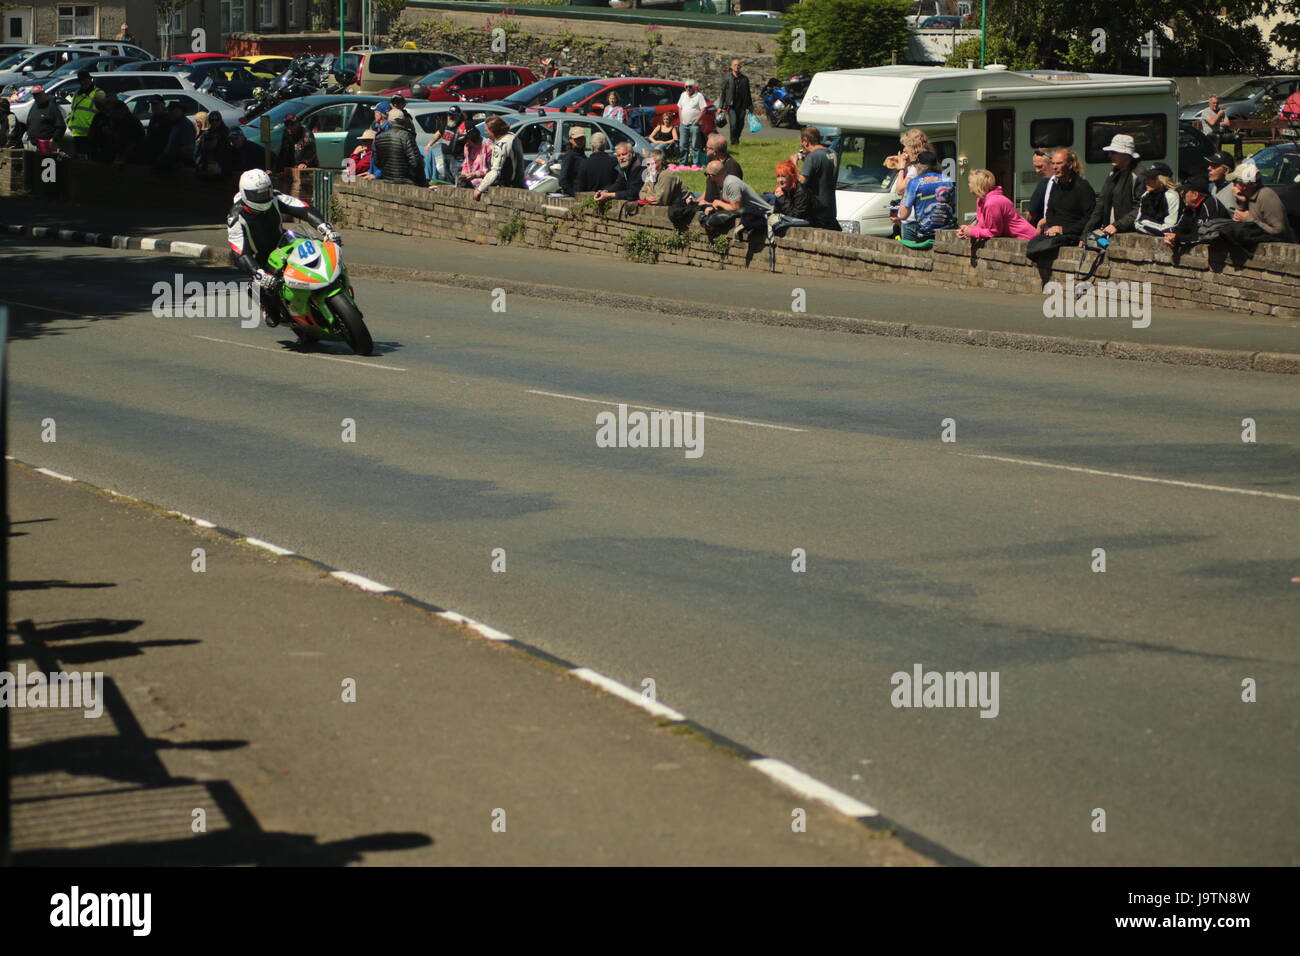 Isle of Man TT Races, Sidecar, Supersport/Lightweight/Newcomers (all classes) Qualifying Session and Practice Race. Saturday, 3 June 2017. 48 Matthew Rees on his Kawasaki supersport motorcycle of the PMR Racing/GT Superbikes team. Credit: Eclectic Art and Photography/Alamy Live News. Stock Photo